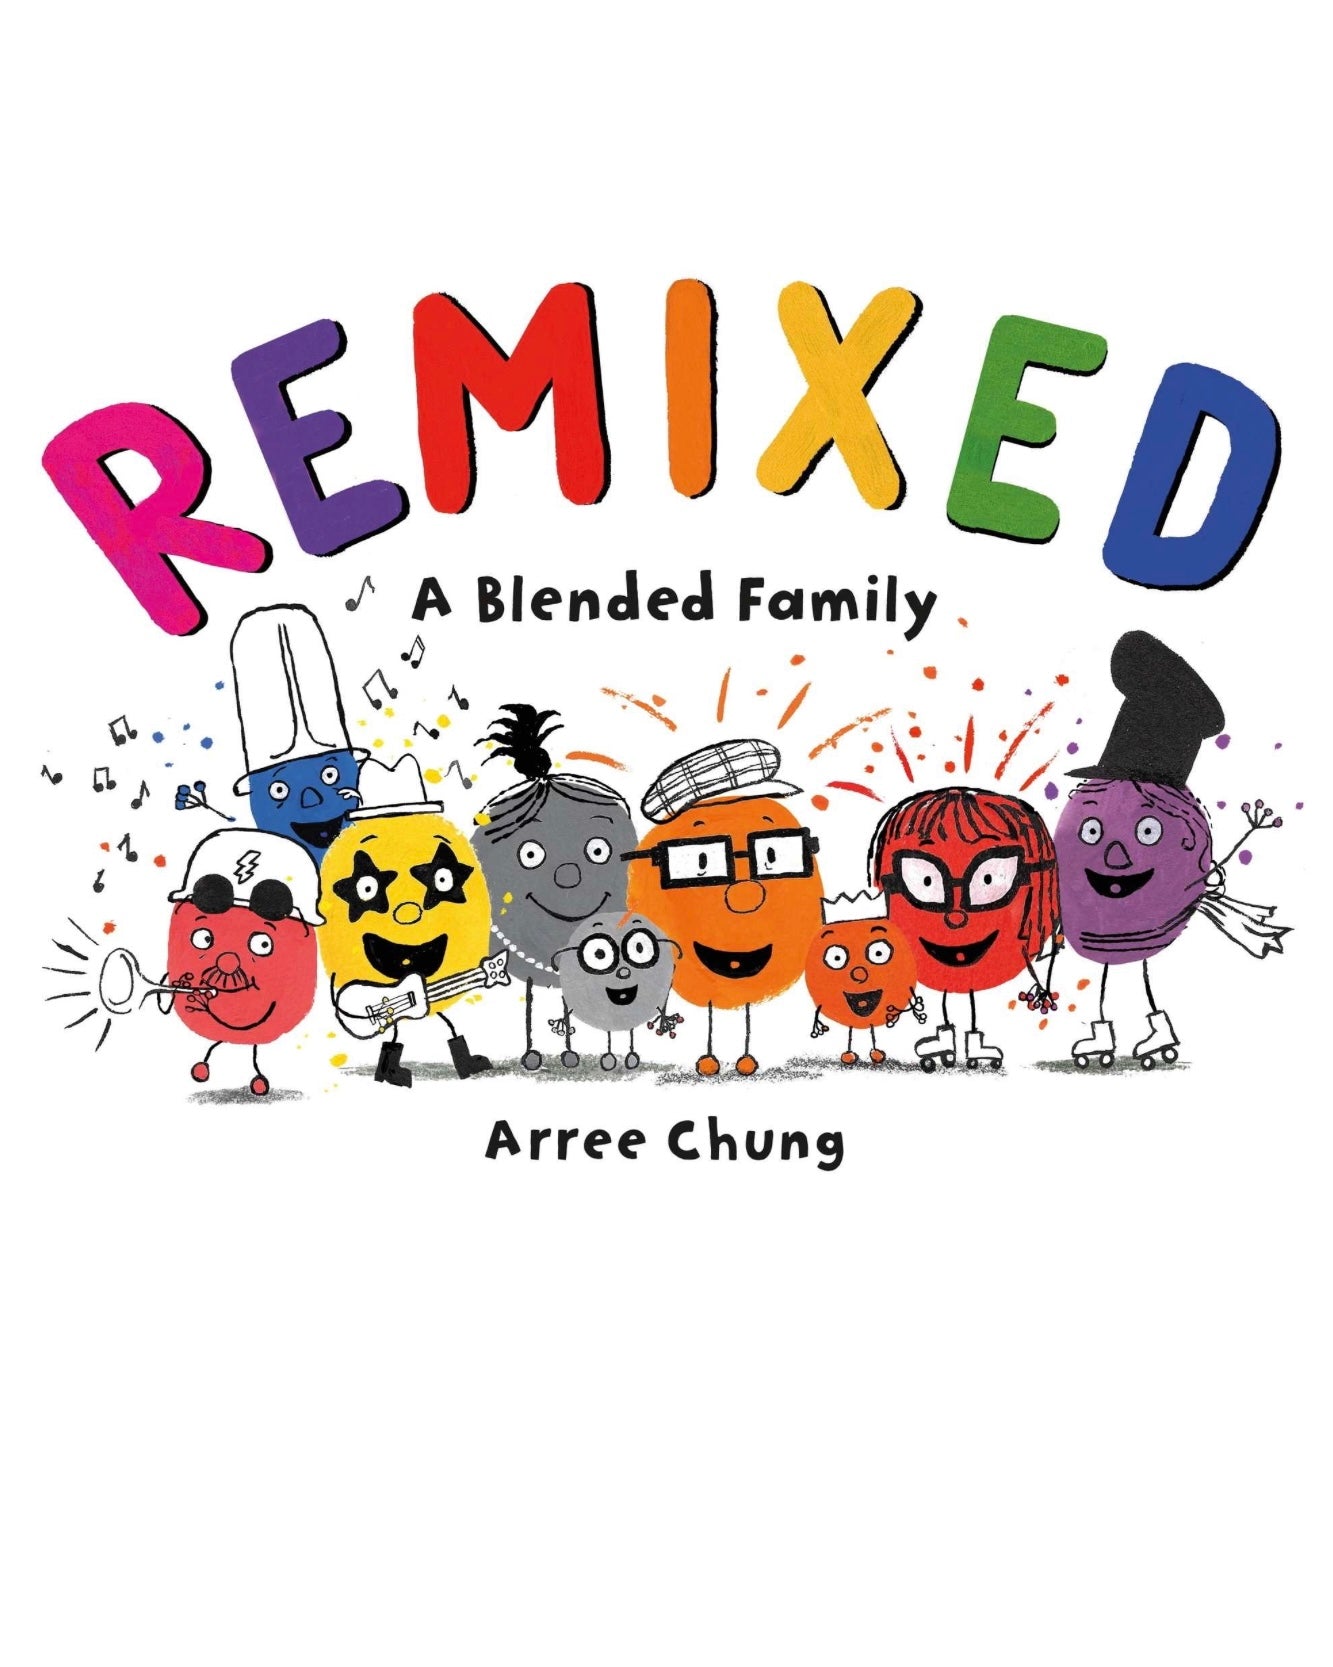 Remixed (A Blended Family)